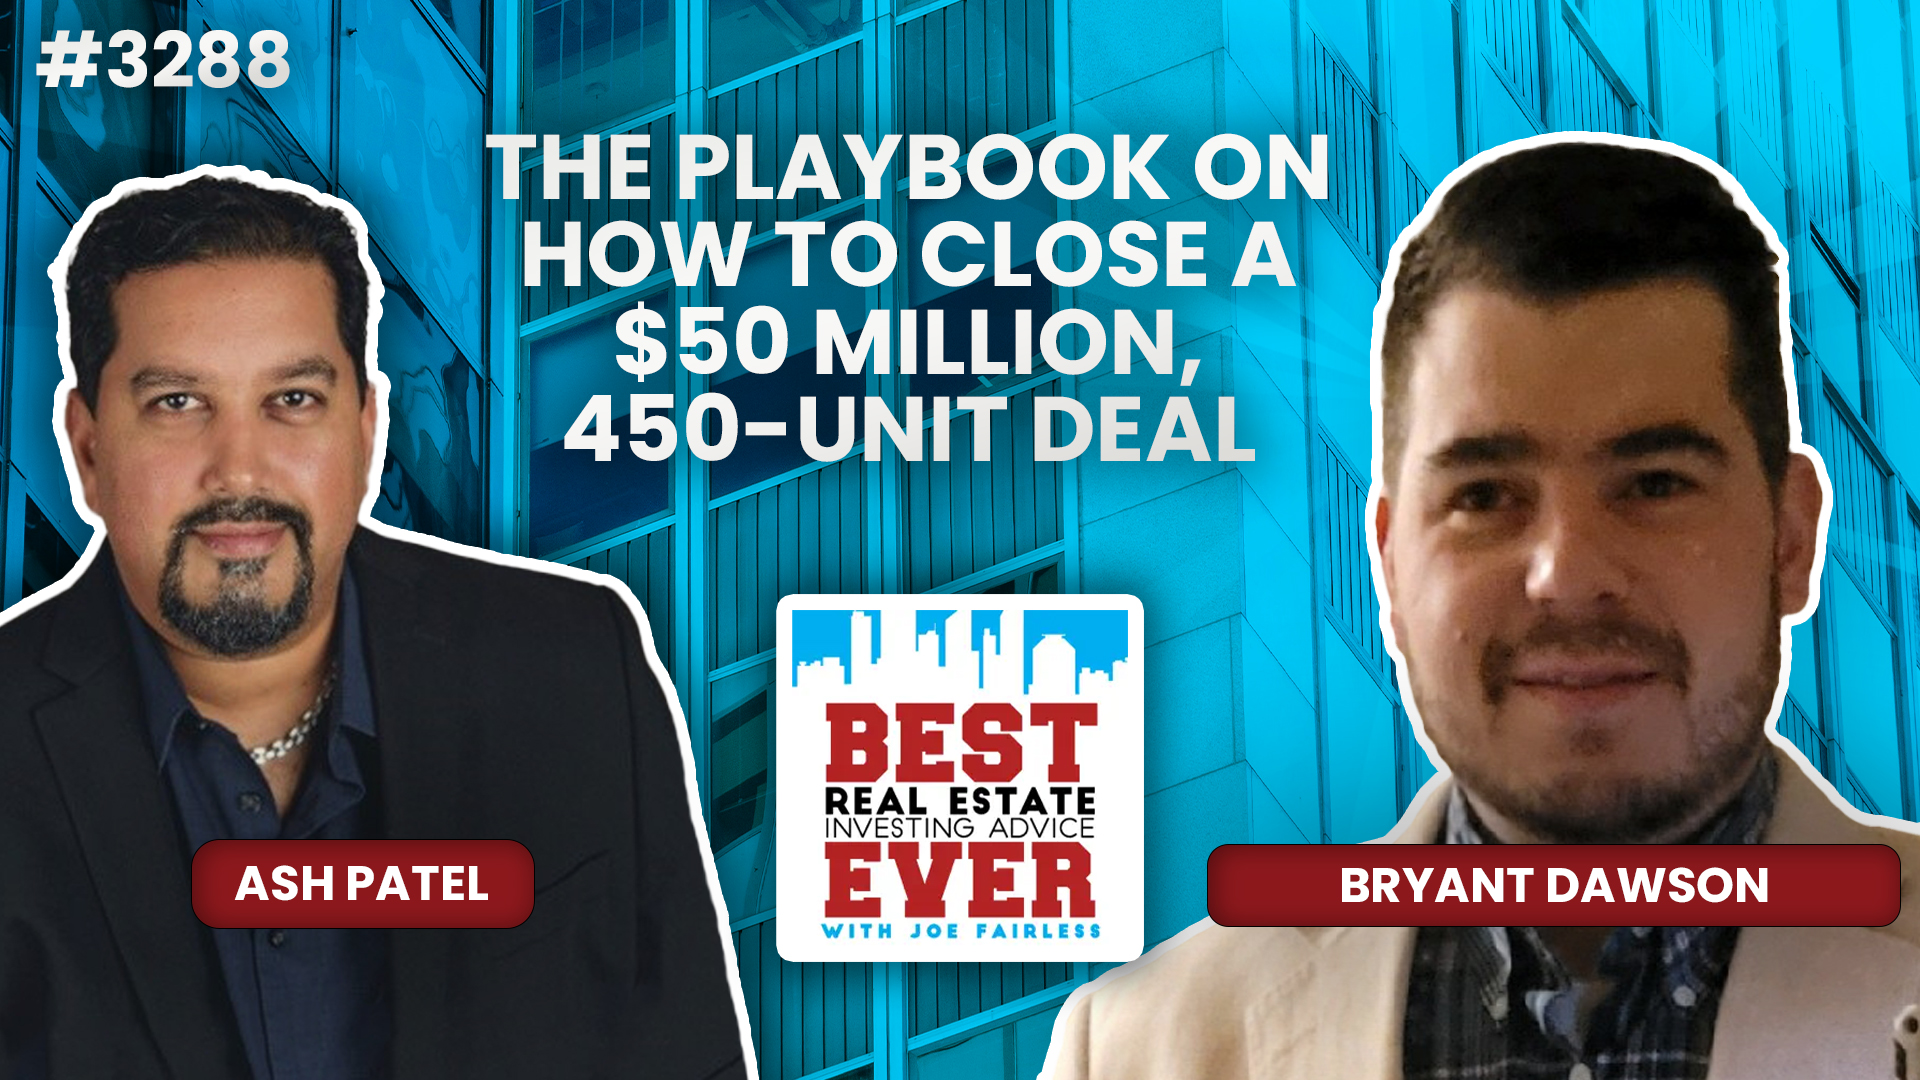 JF3288: Bryant Dawson - The Playbook on How to Close a $50 Million, 450-Unit Deal